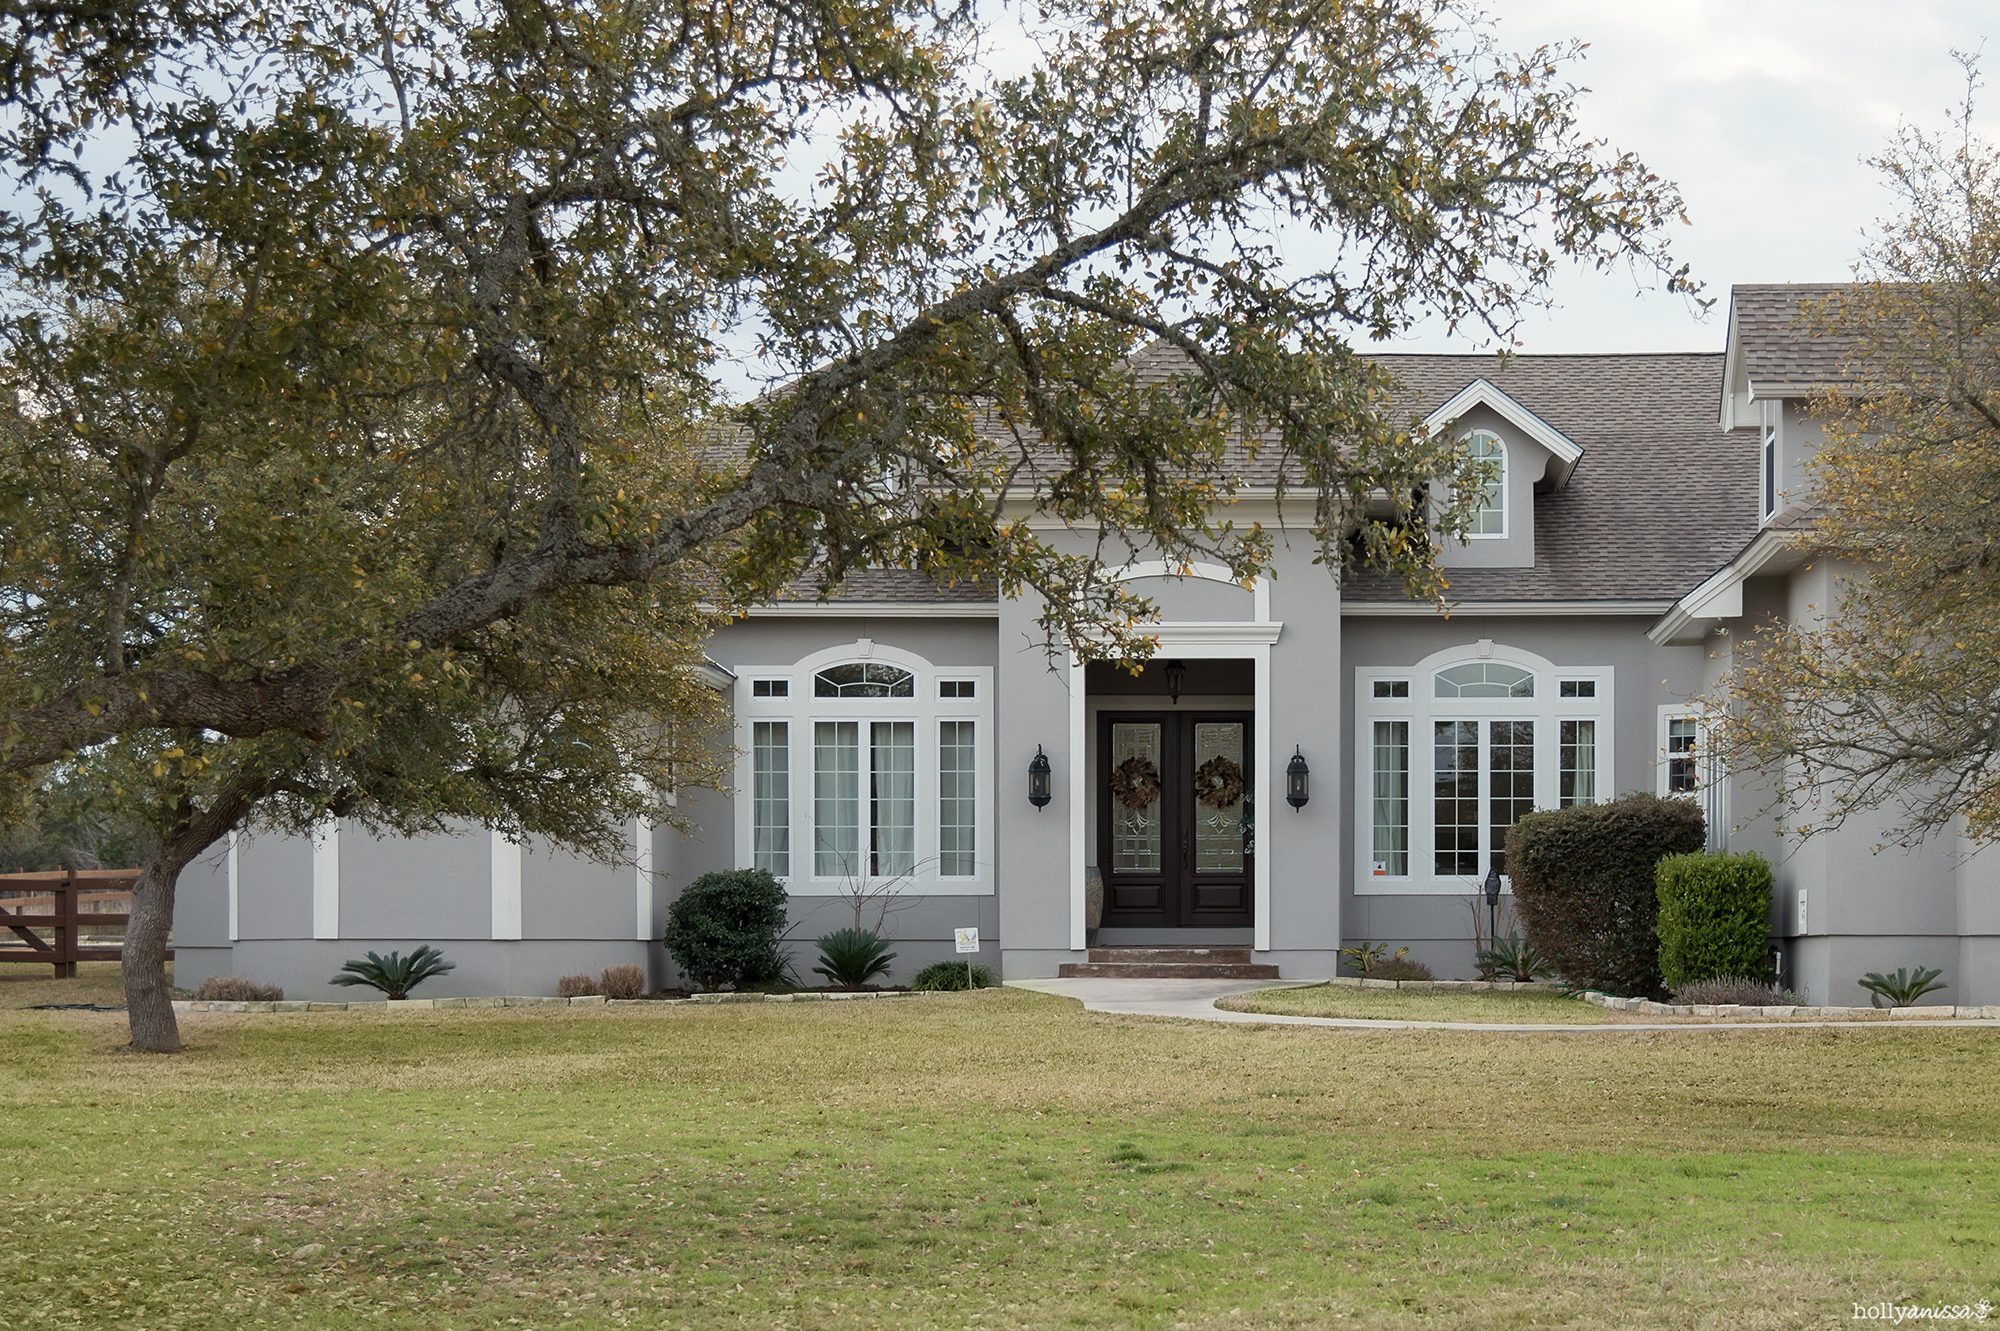 New Braunfels house home real estate photographer